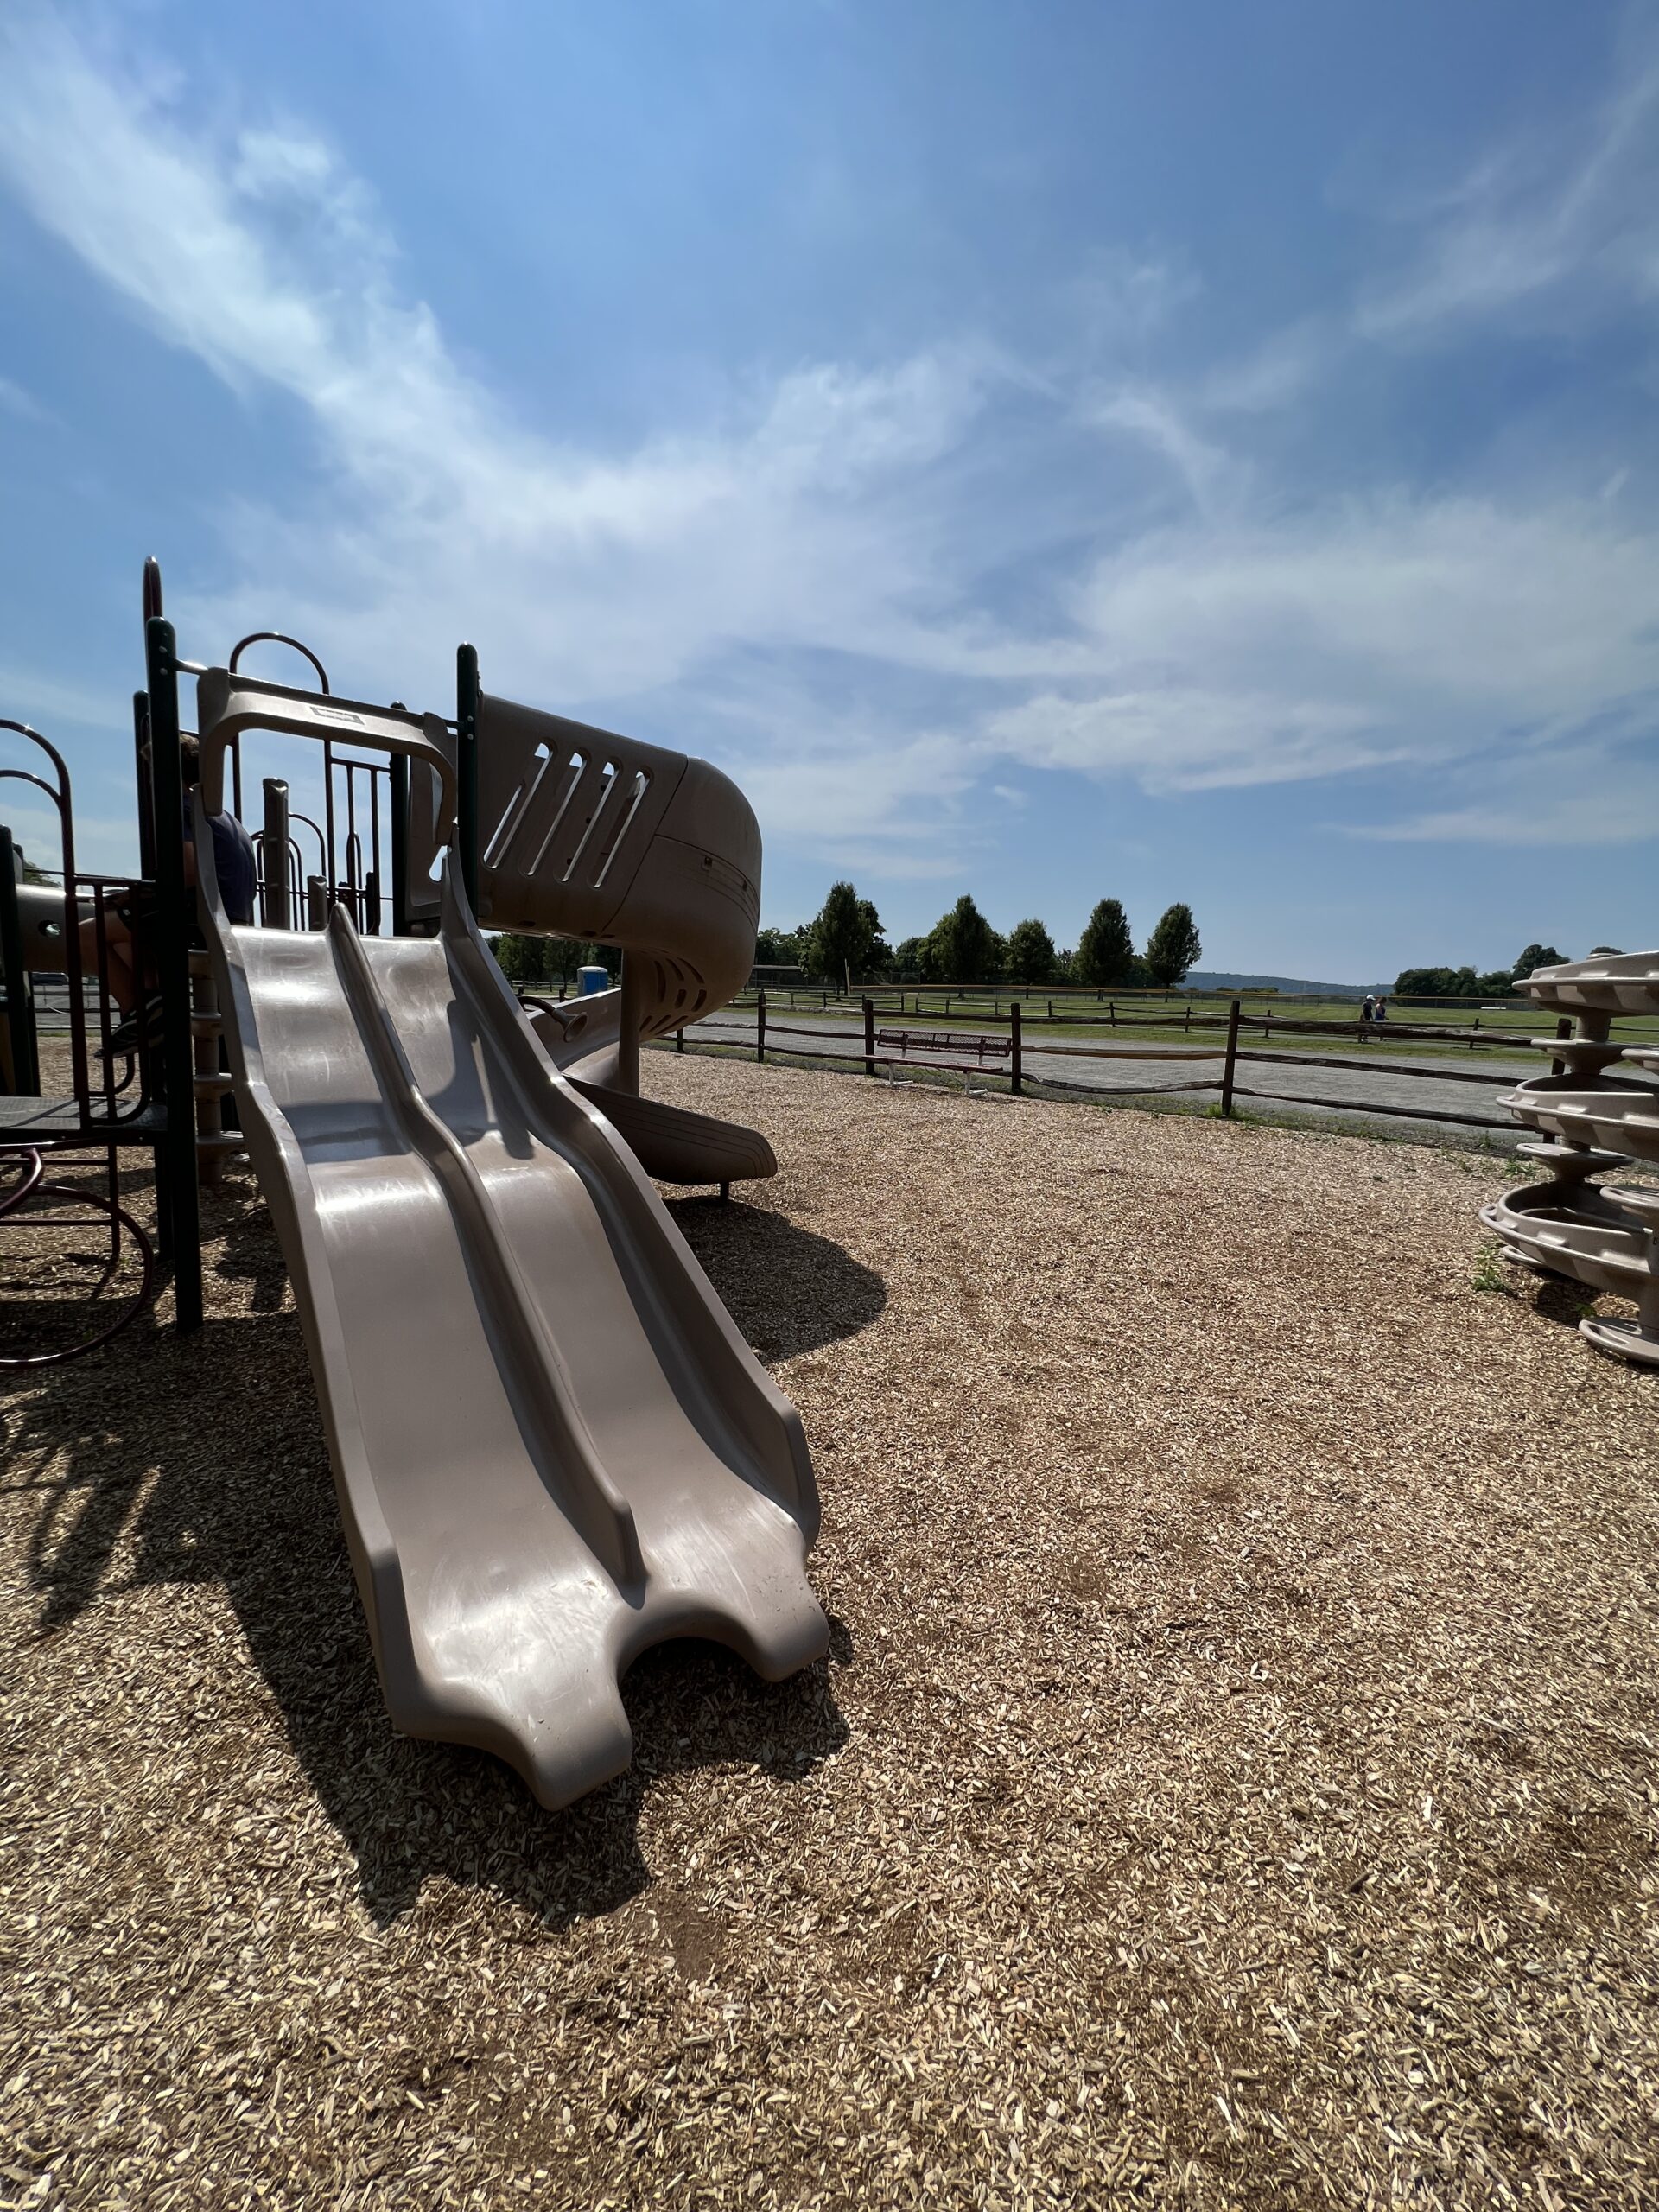 Green Acres Field of Dreams Playground in Independence Township NJ - SLIDE - side by side wavy slides TALL image